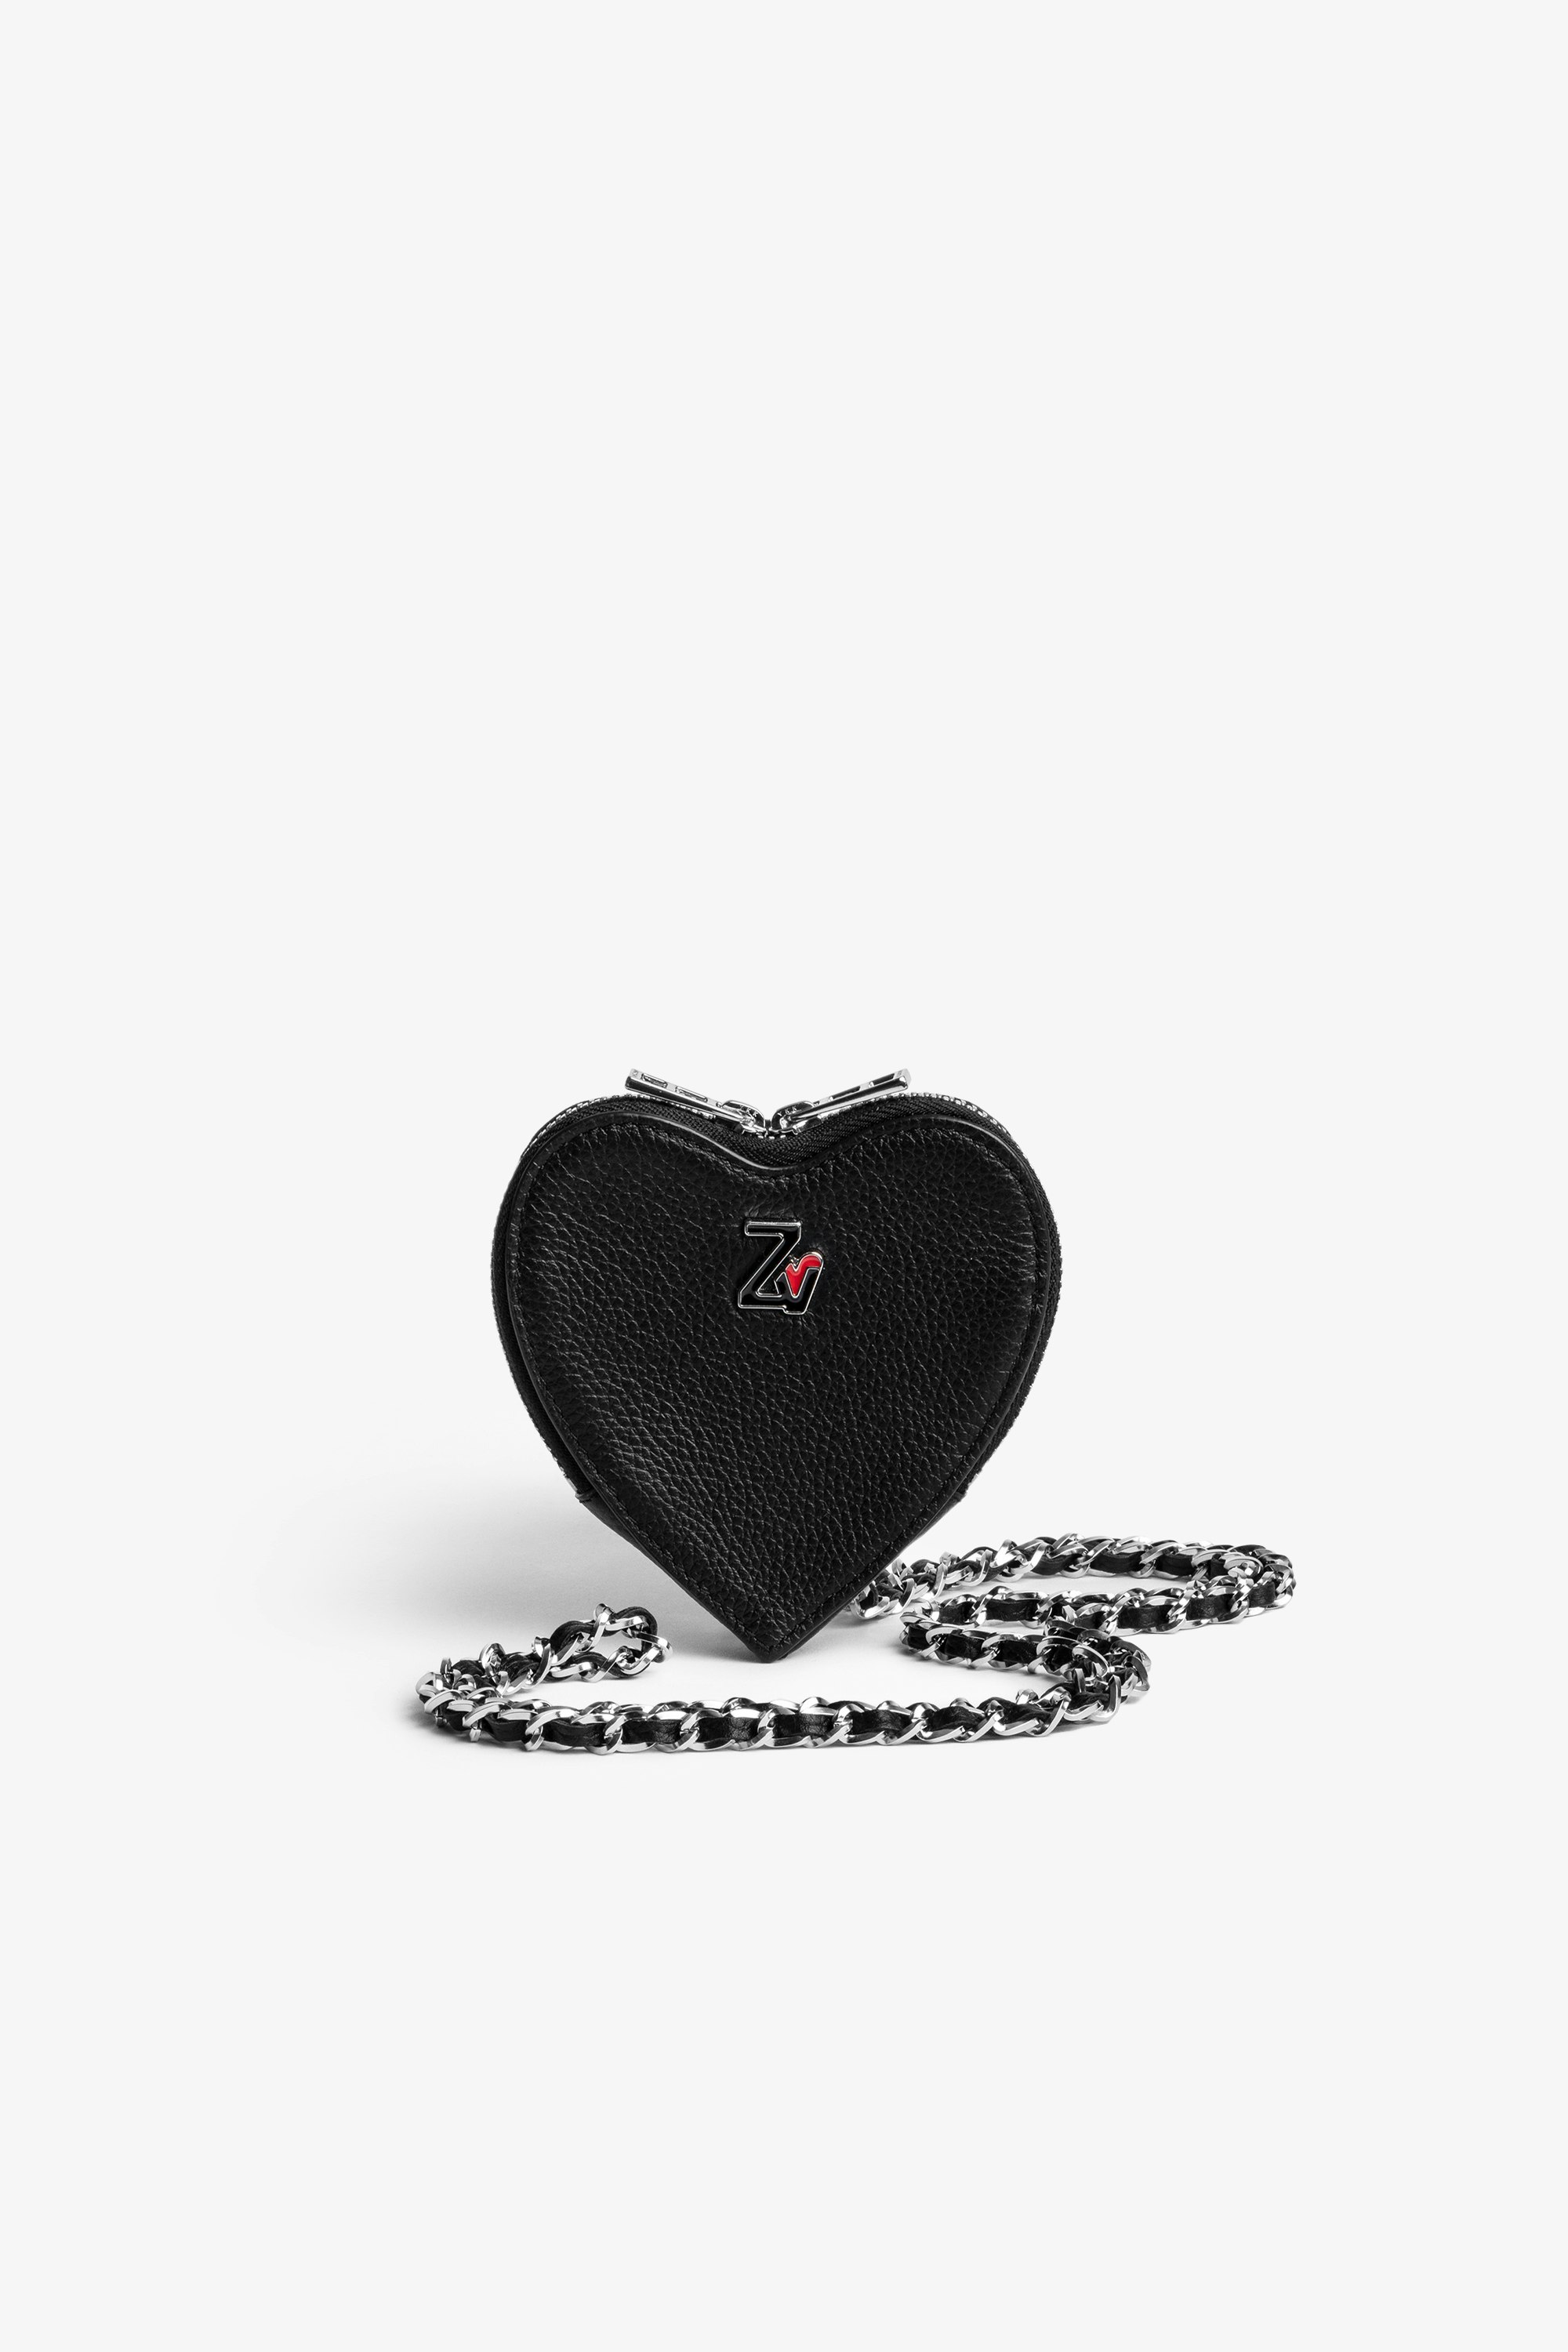 ZV Crush Le Coeur Clutch Women's heart clutch bag in black grained leather with zip closure and chain and leather shoulder strap